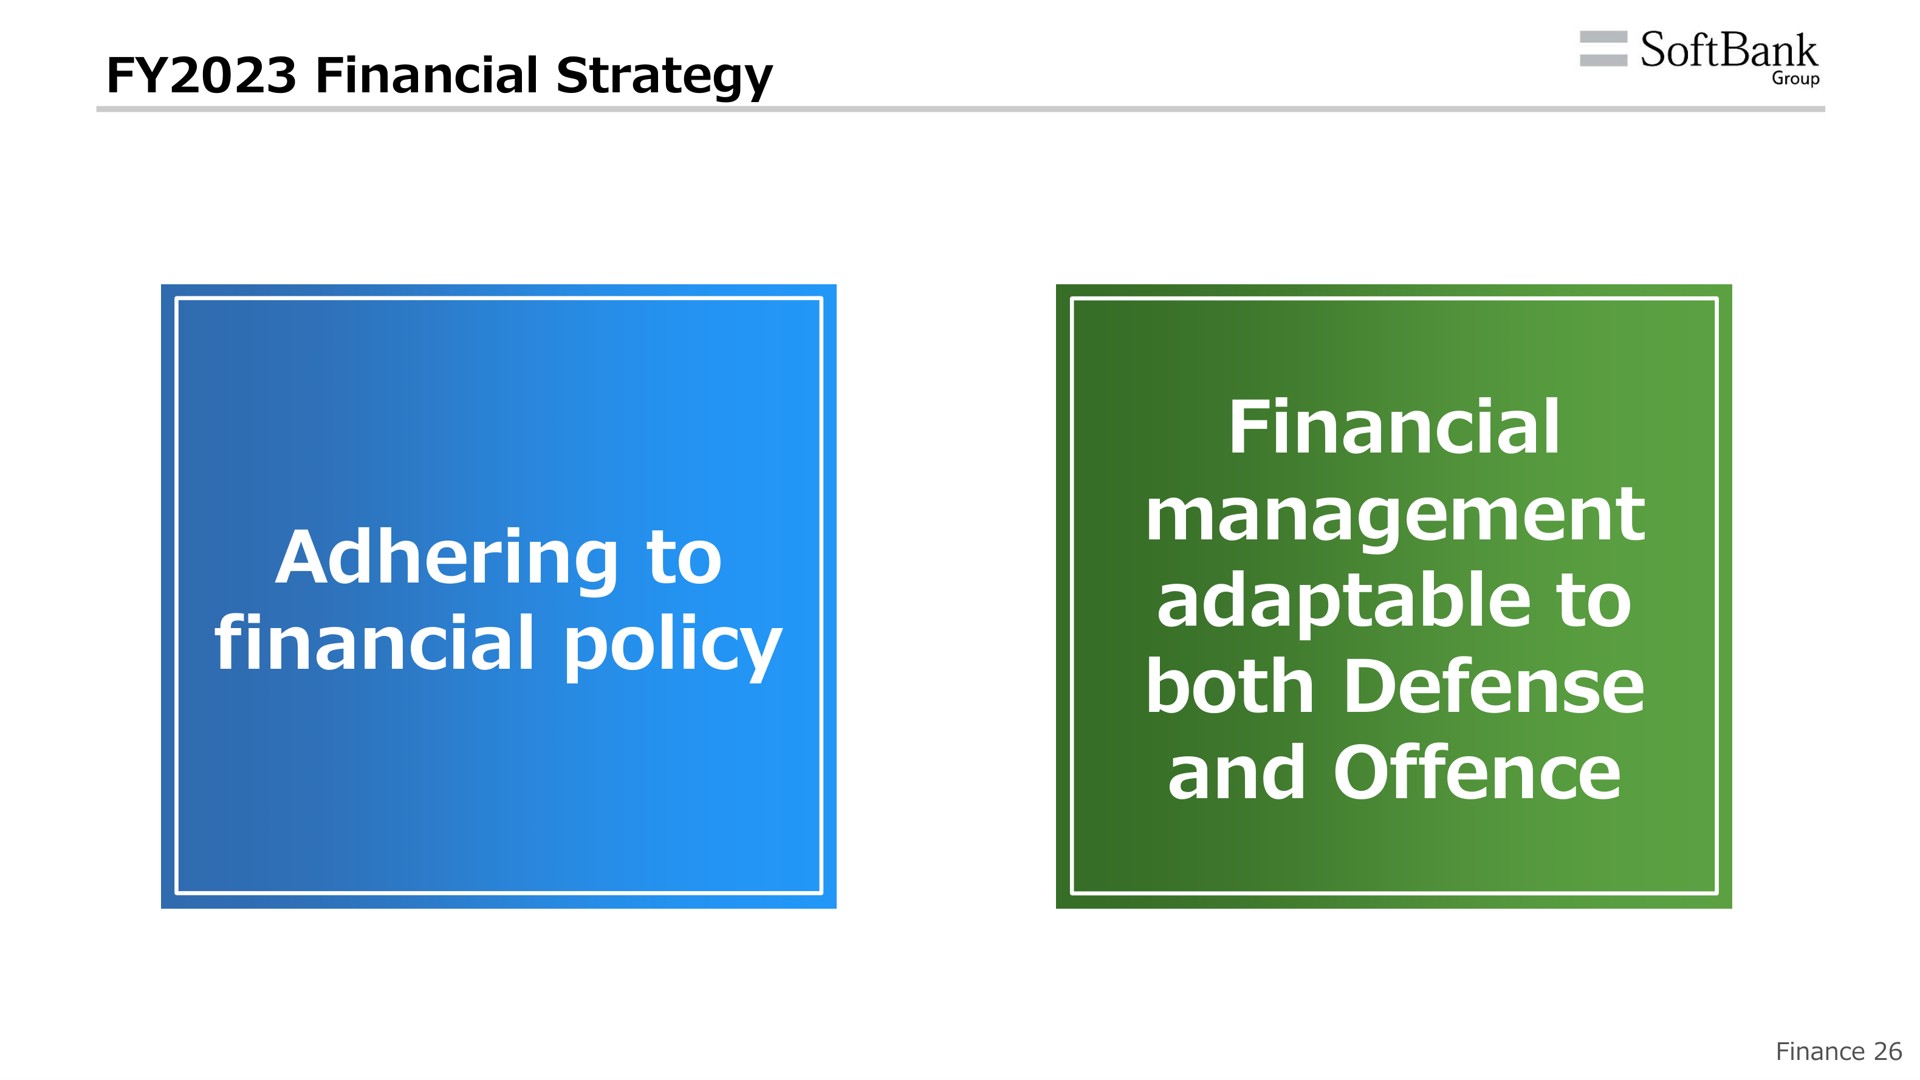 financial strategy adhering to financial policy financial management adaptable to both defense and | SoftBank